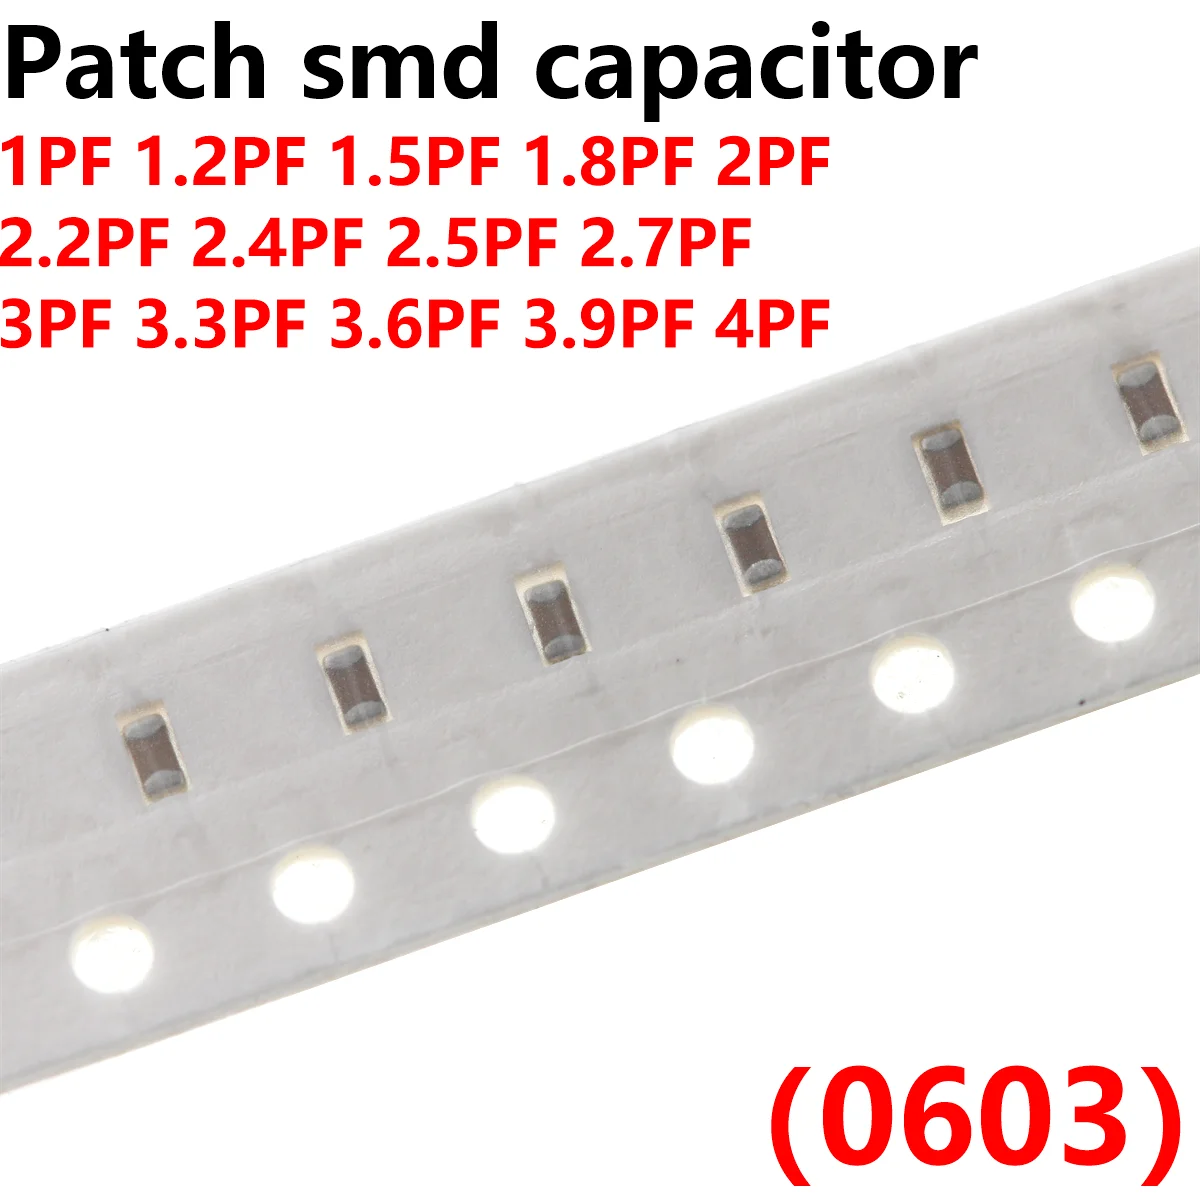 500PCS 0603 Patch smd capacitor 100NF 220NF 470NF 680NF 1UF 2.2UF 11PF 2PF 2.2PF 2.4PF 2.5PF 2.7PF 3PF 3.3PF 3.6PF 3.9PF 4PF 100pcs 0603 smd capacitance 104 474 ceramic capacitor 100nf 220nf 330nf 470nf 680nf 1uf